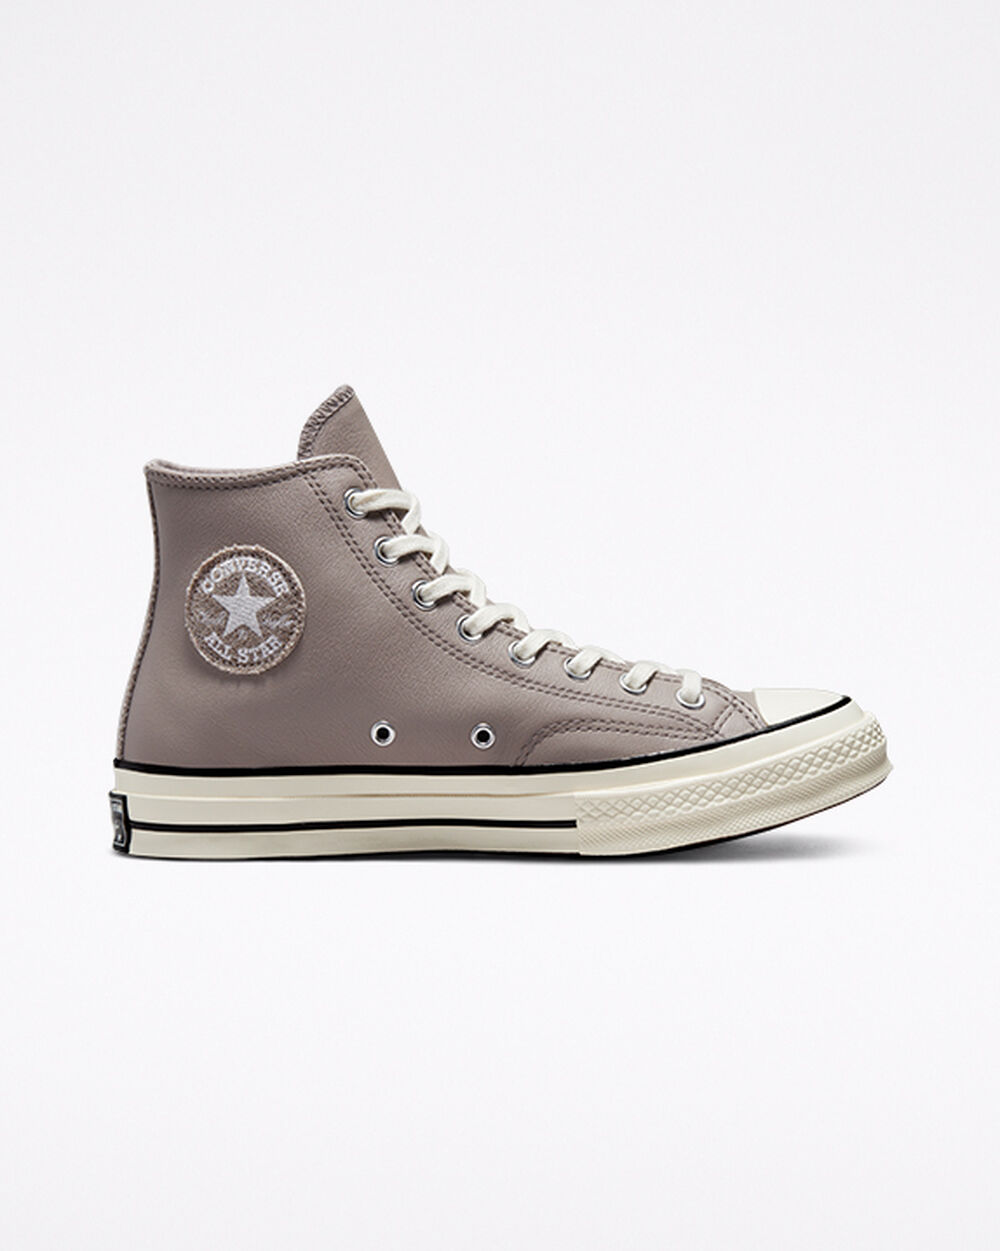 Tenis Converse Chuck 70 Mujer Grises Blancos Negros | Mexico-126306